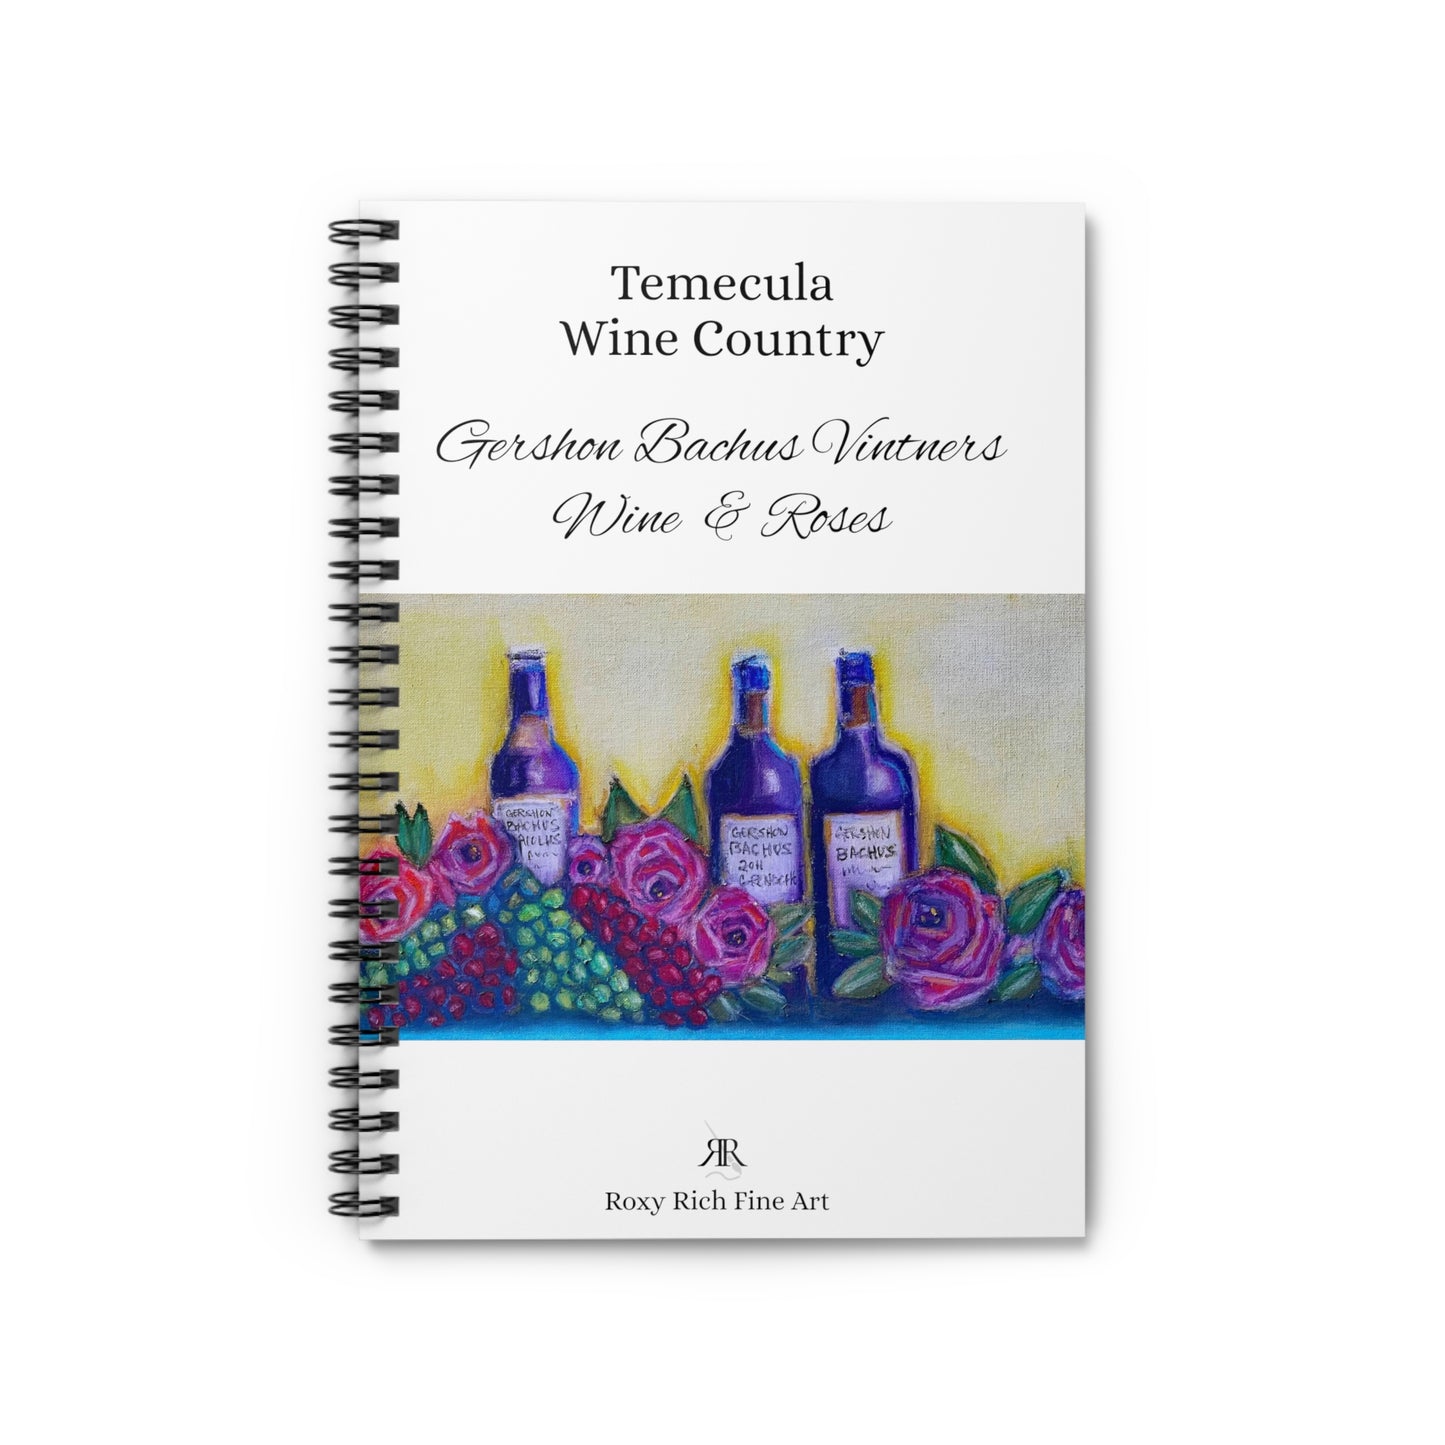 Temecula Wine Country "Vin et roses GBV" Cahier à spirale